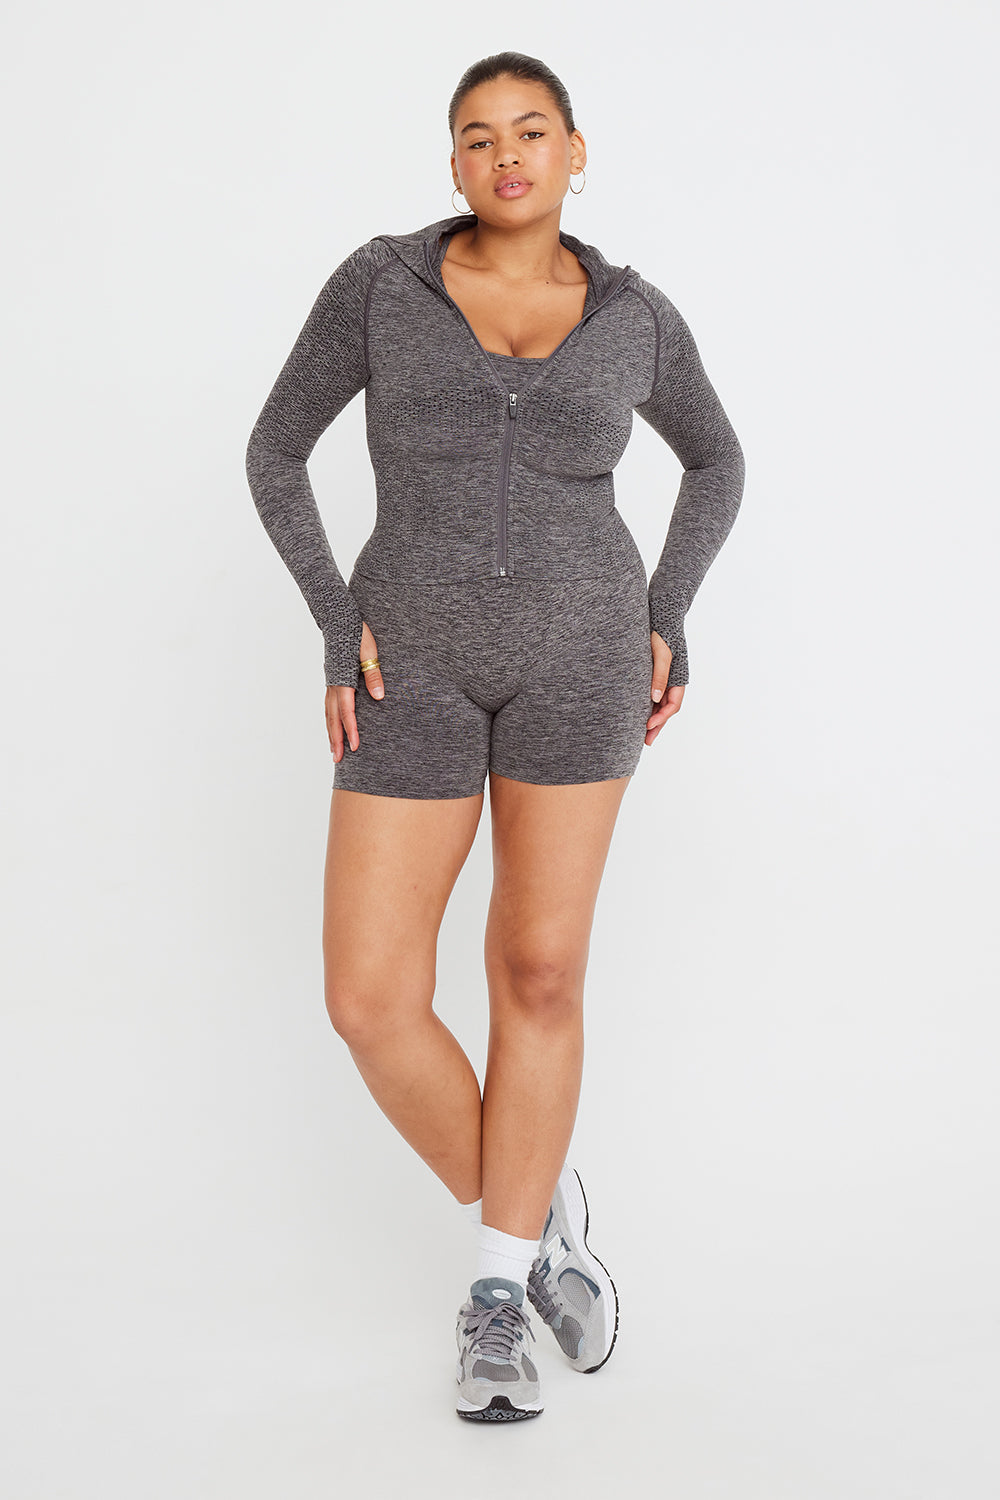 Petite Grey Marl Brushed Jersey Strappy Short Romper